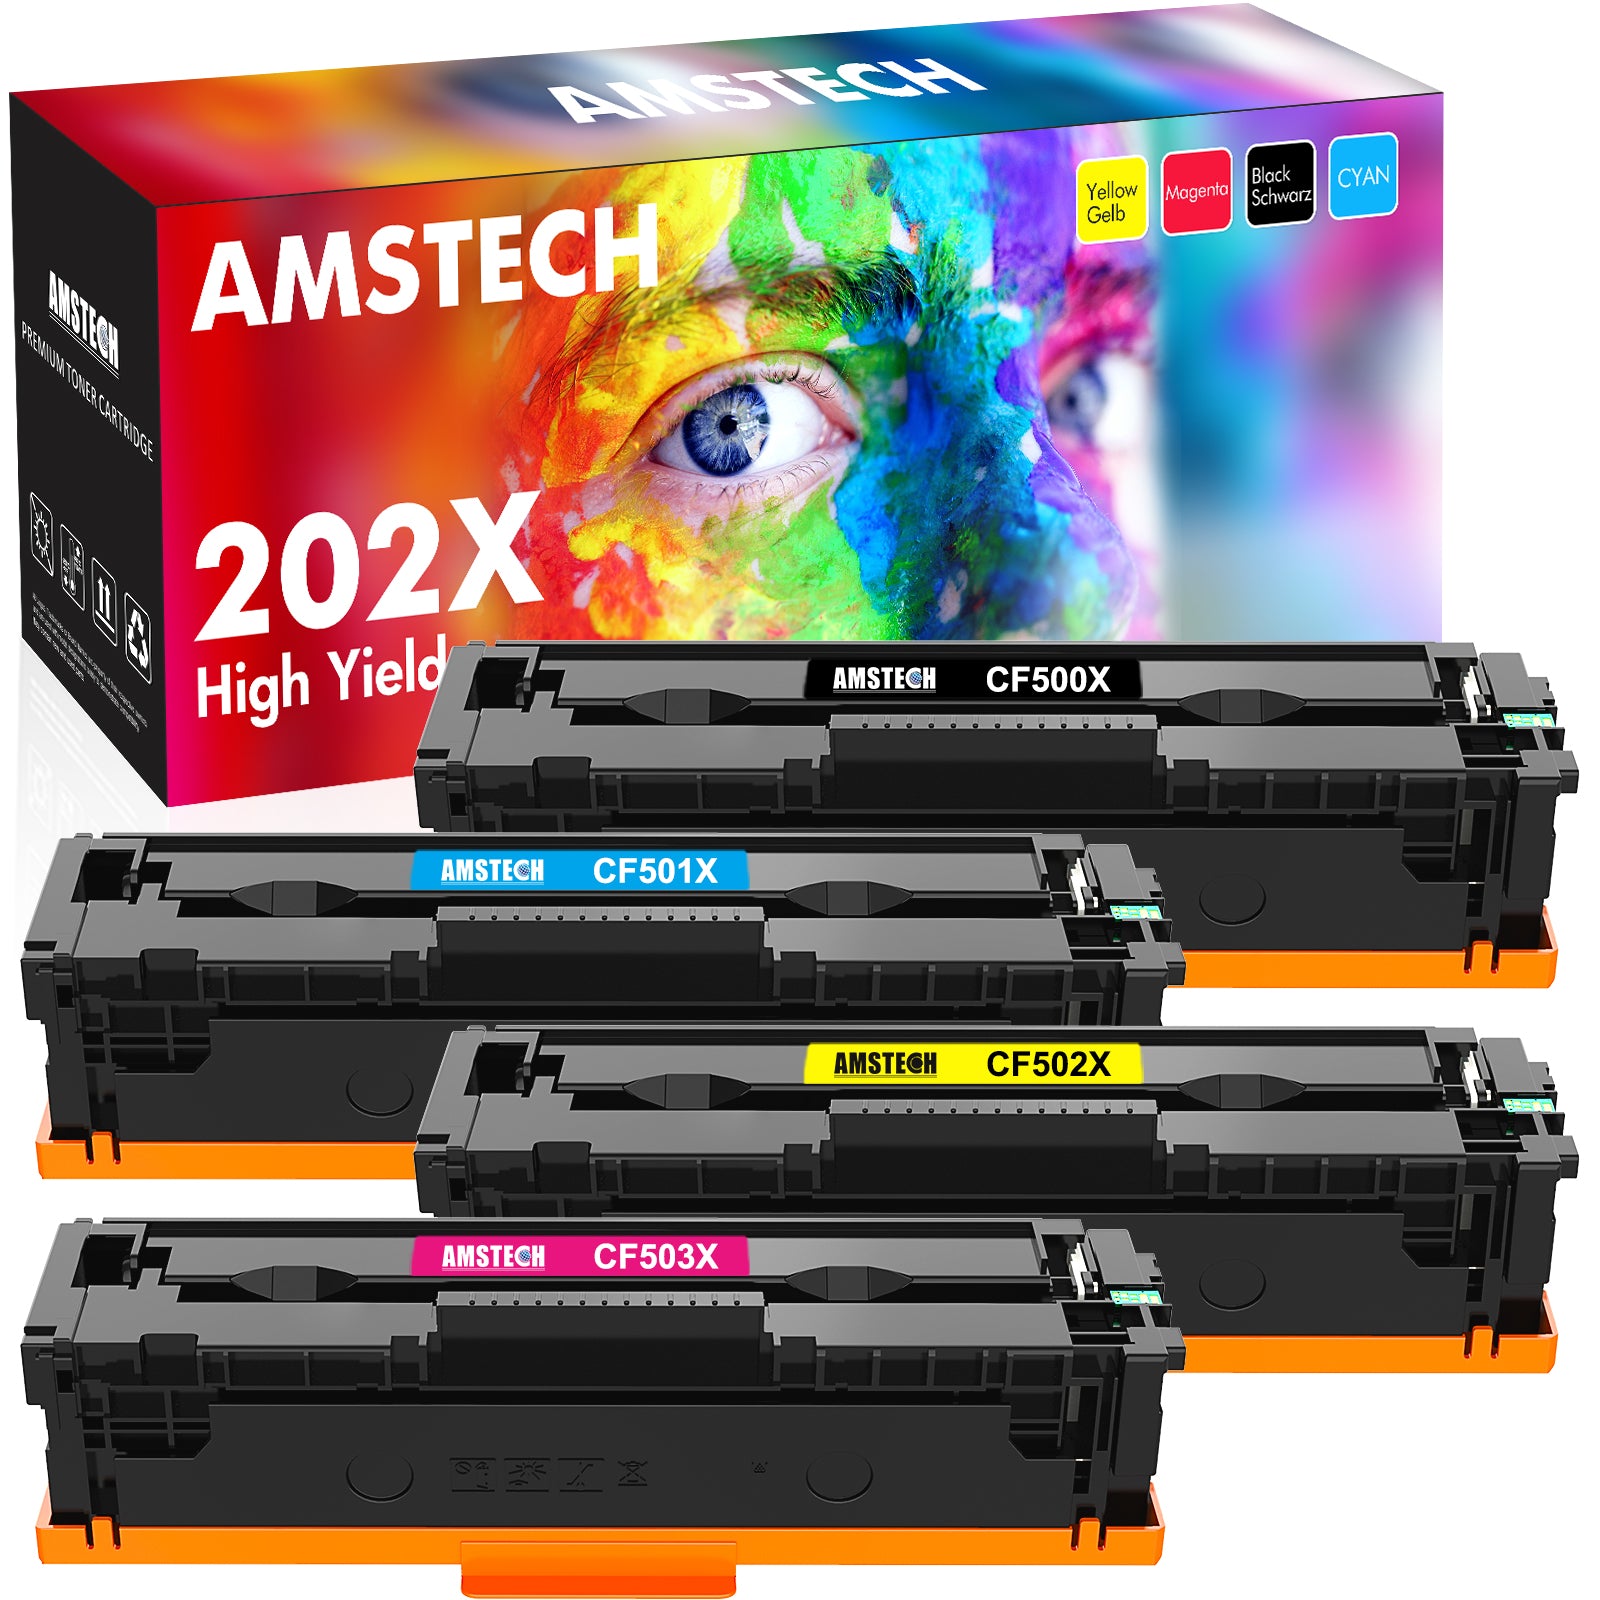 Amstech Compatible Toner Cartridge Replacement for HP 202X CF500X 202A CF500A HP Color Laserjet Pro MFP M281fdw M281cdw M254dw M281fdn M281 M281dw Toner Cartridge (Black Cyan Yellow Magenta, 4-Pack)